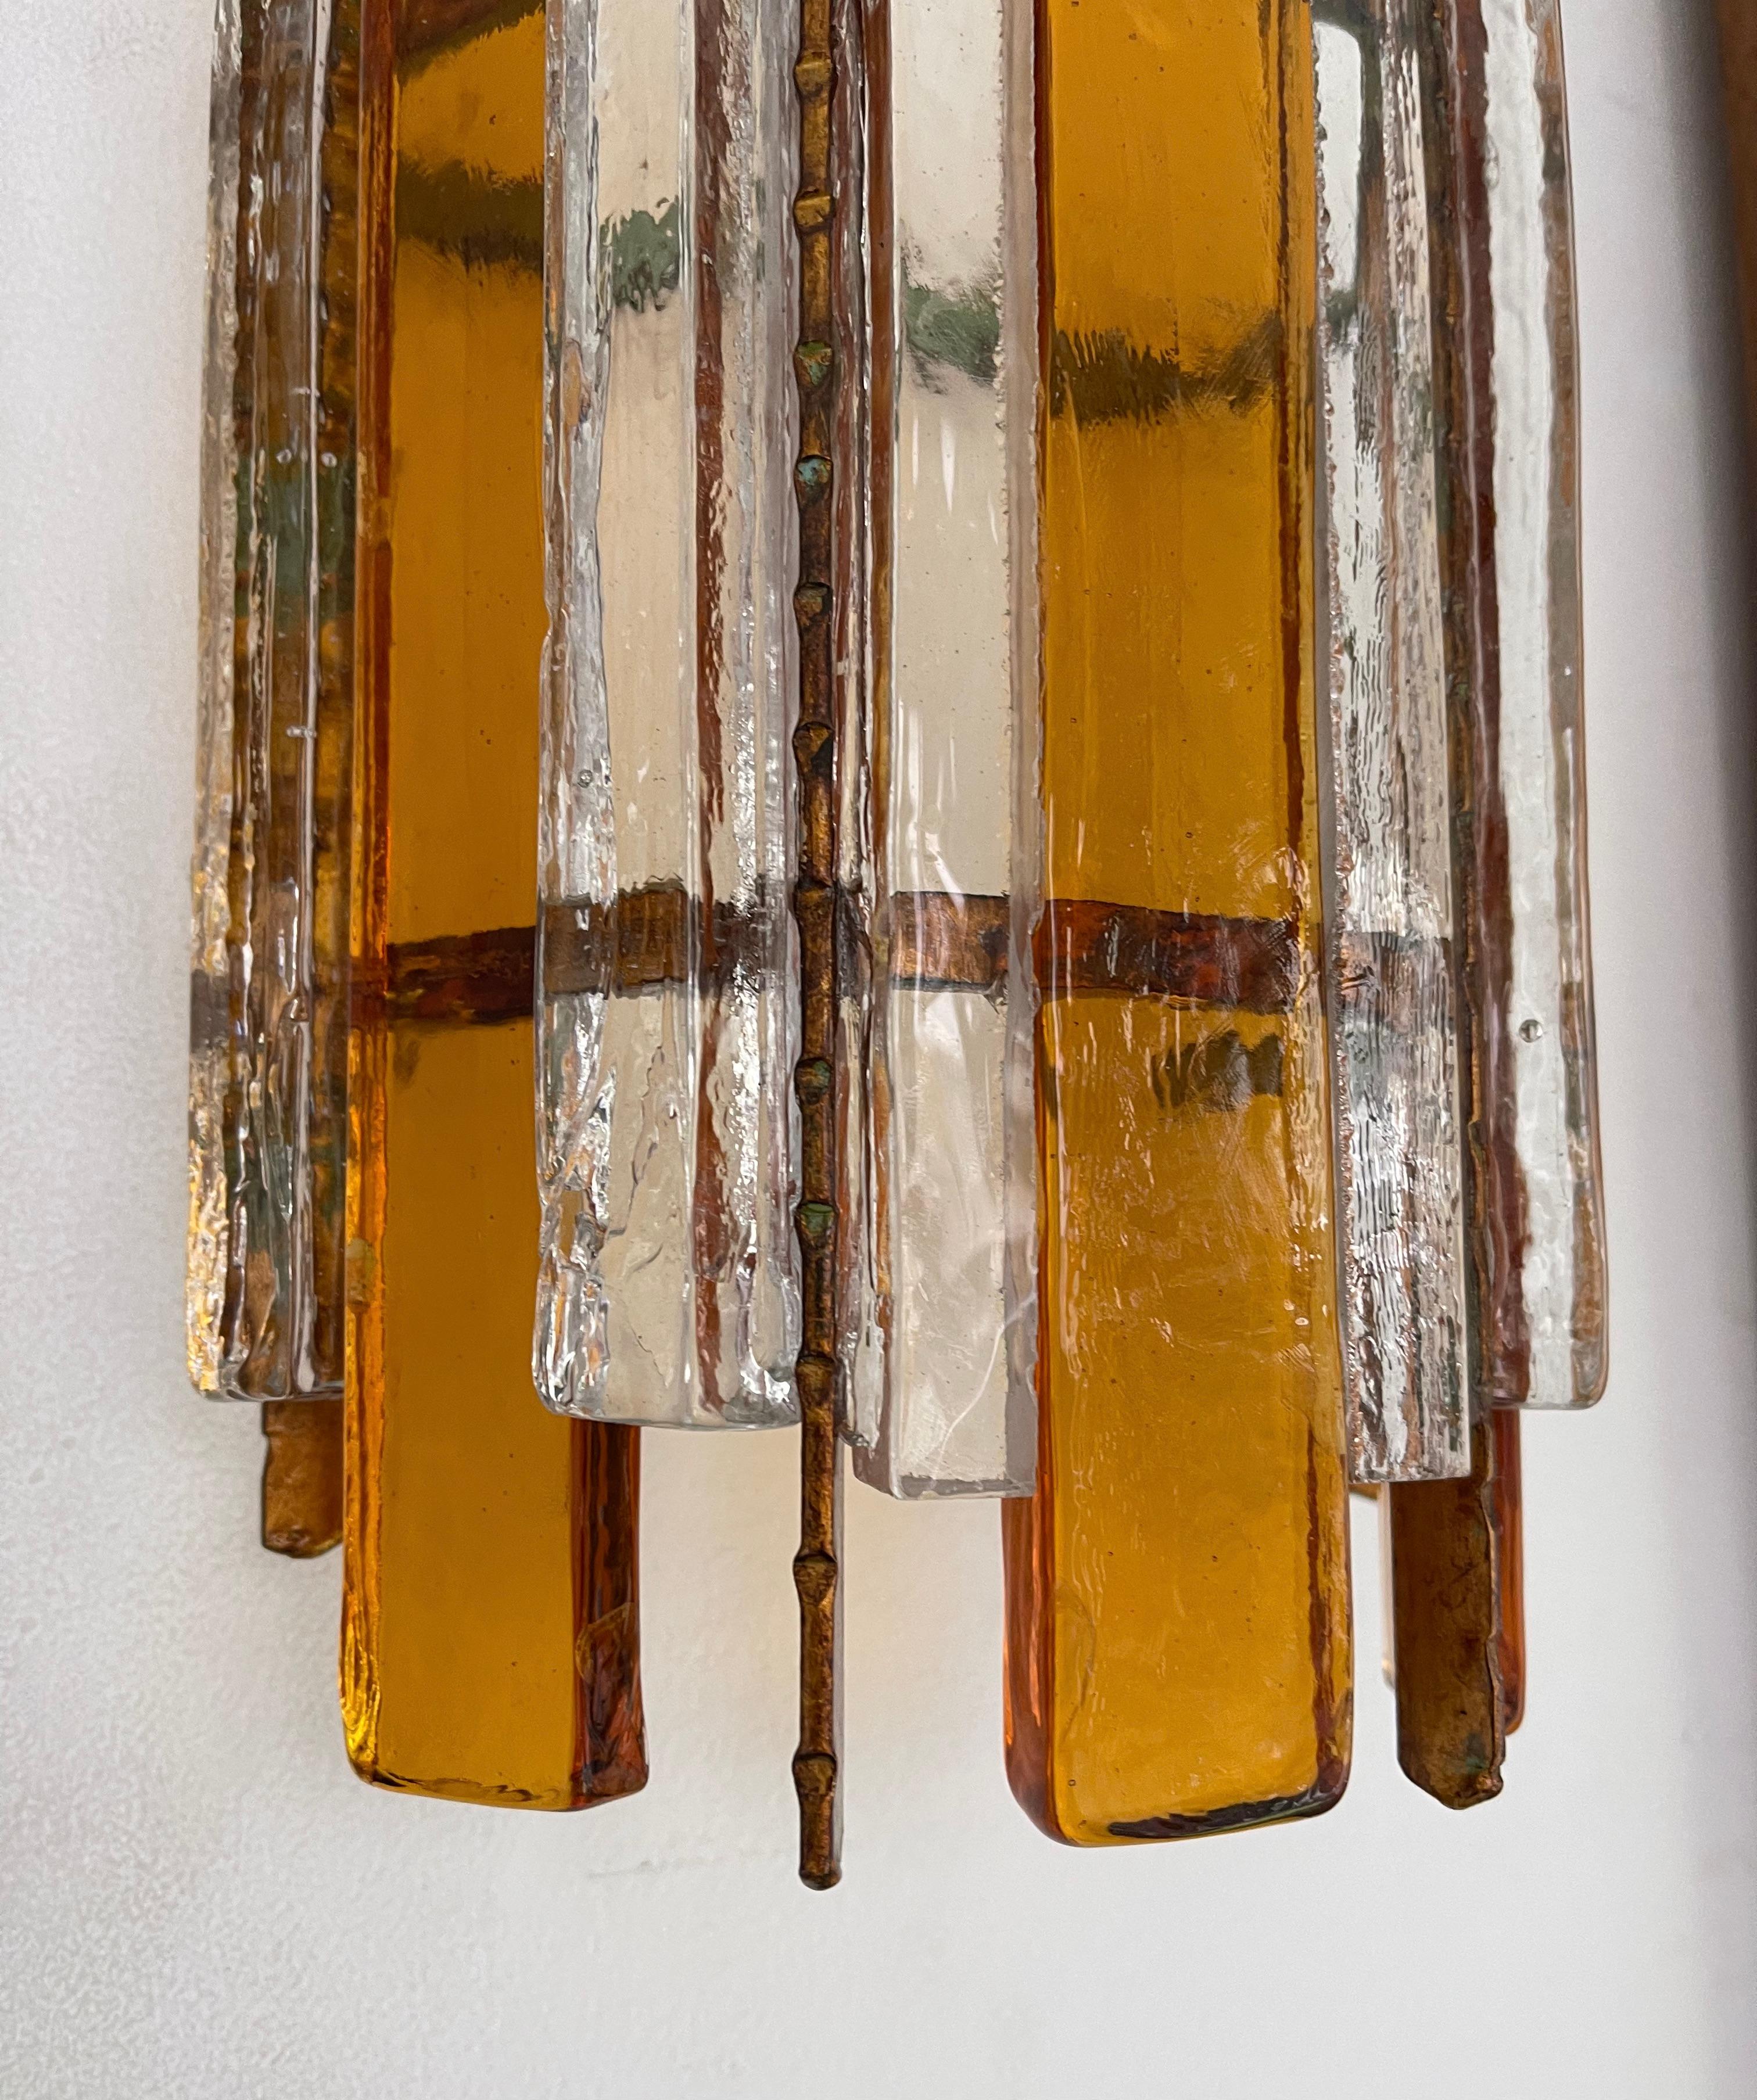 Pair of Hammered Glass Wrought Iron Sconces by Longobard, Italy, 1970s For Sale 2